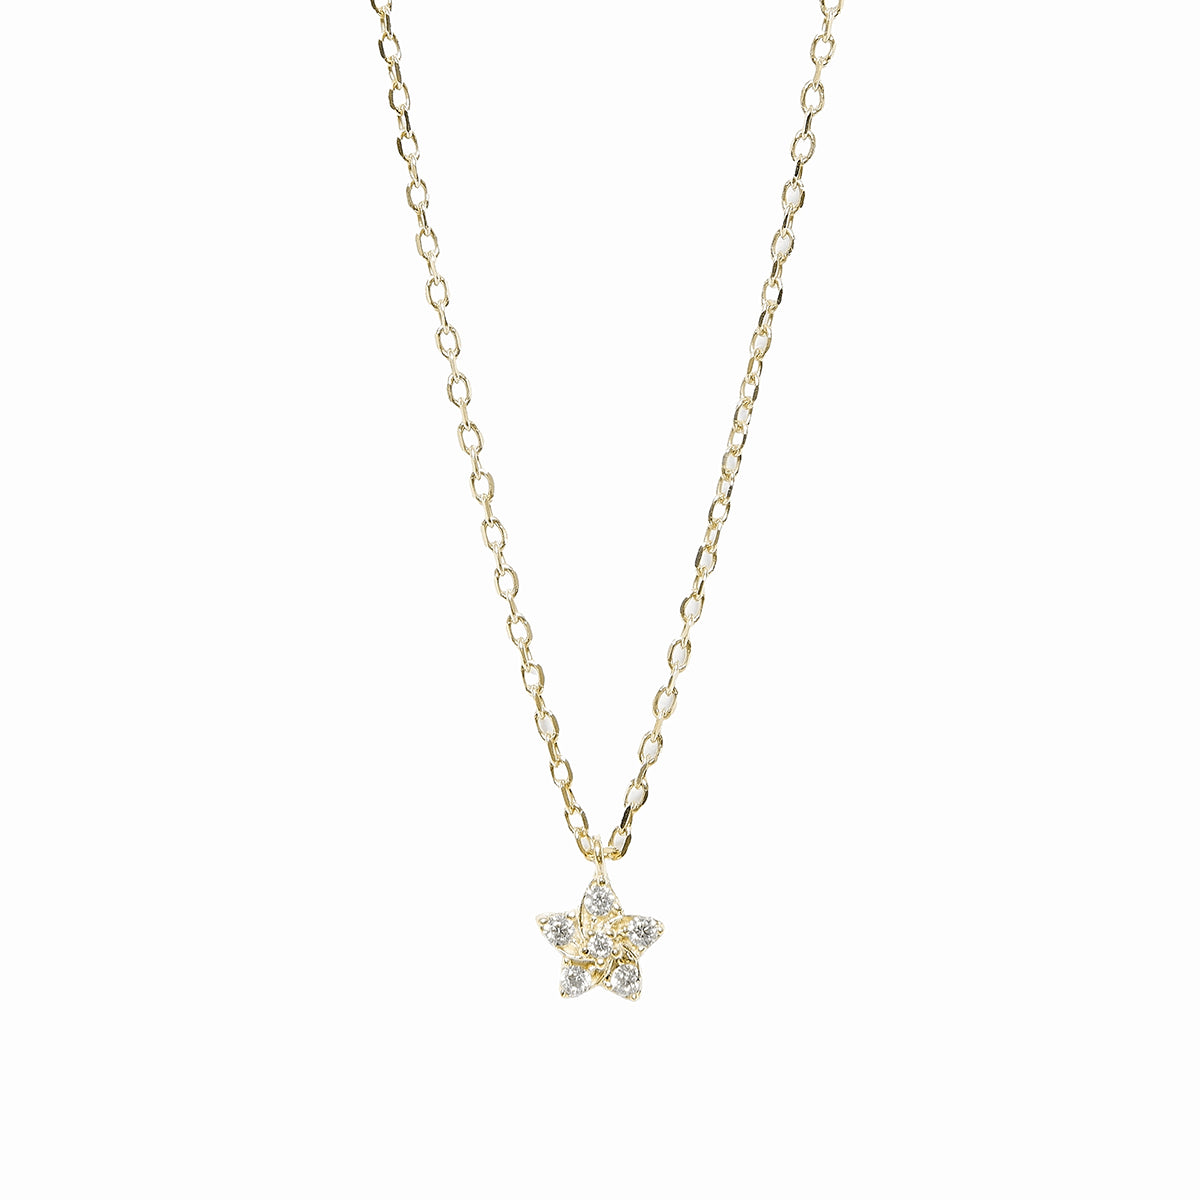 Flower necklace 18k sterling gold and diamonds